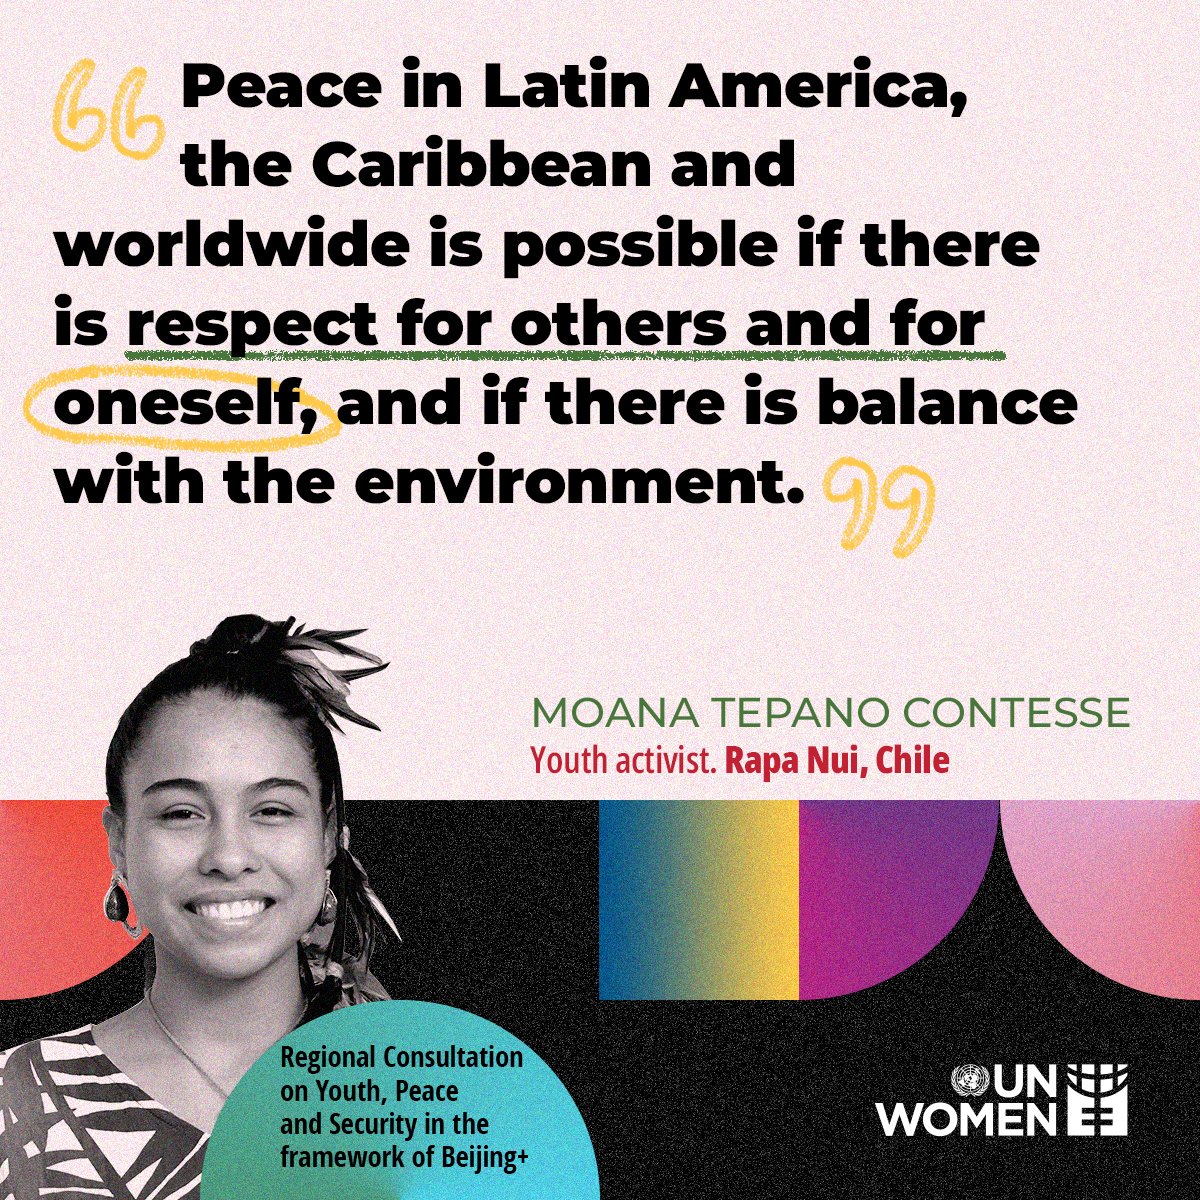 EN-PeaceMonth-Youth-MoanaTepanoContesse-Chile.png